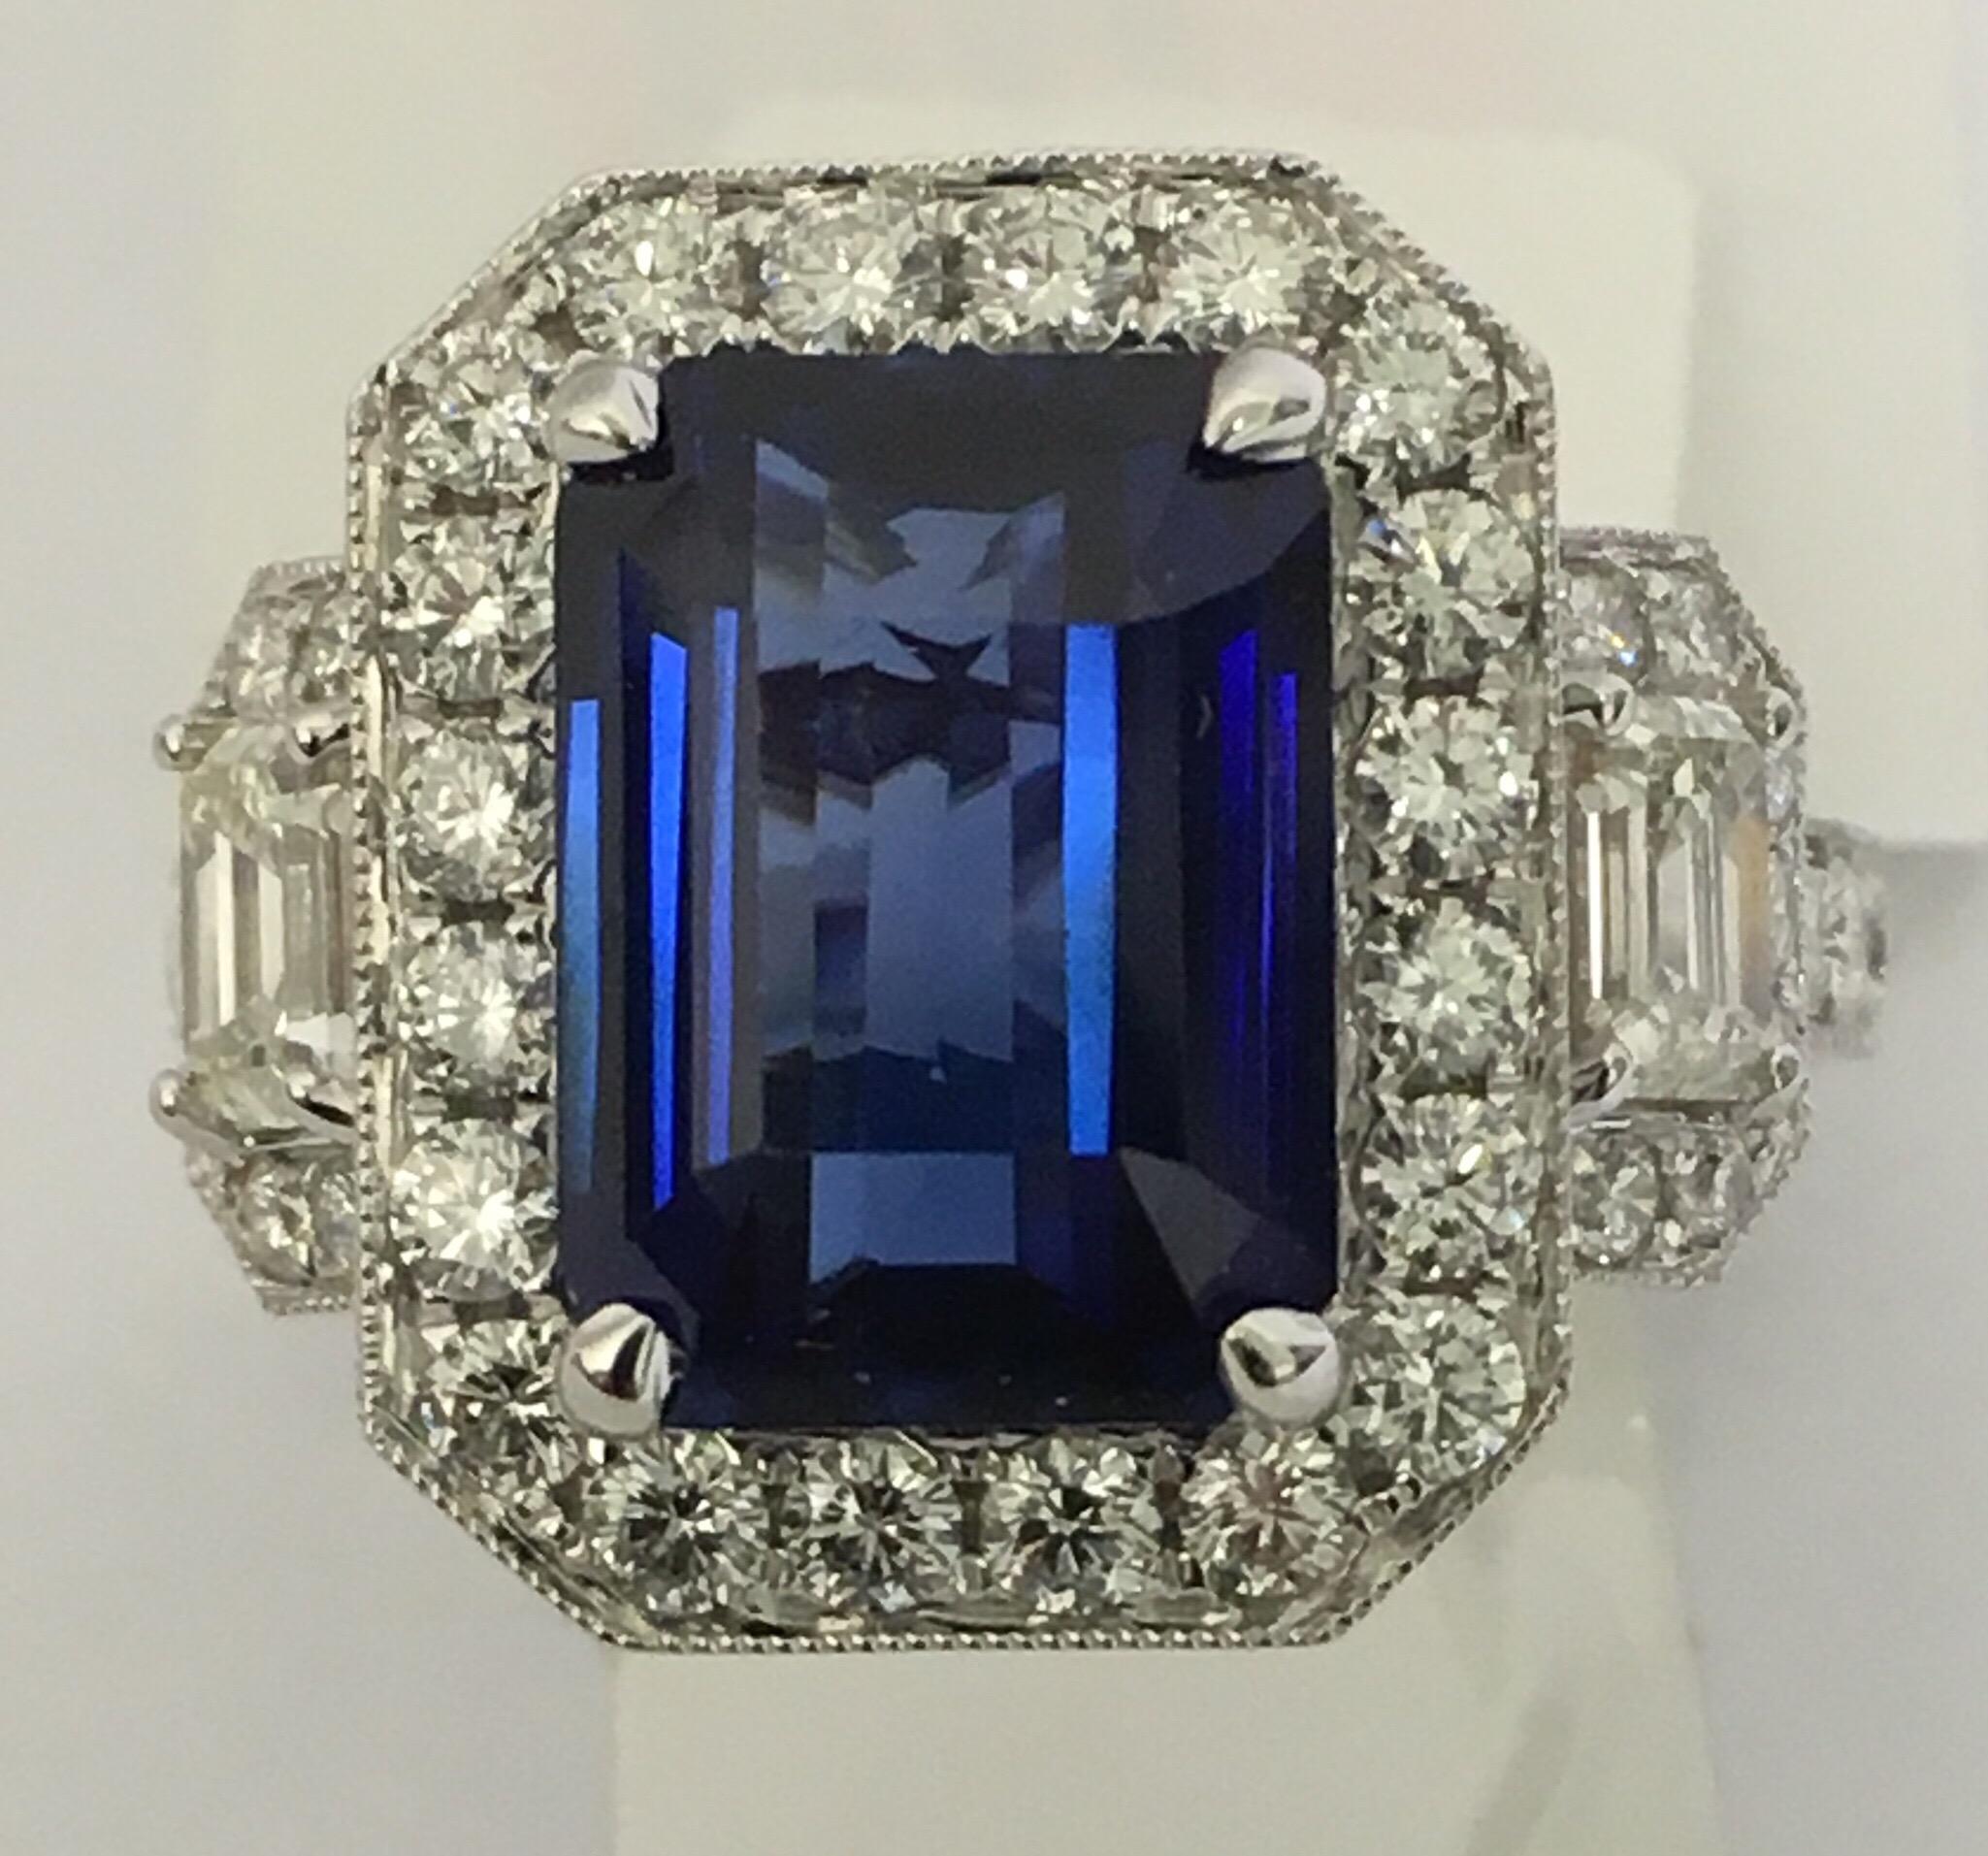 Octagon 5.60 Carat Blue Sapphire is Even color blue sapphire set in 18 Karat white Gold. Additional 1.81 Carat white diamonds. All the diamonds are matched full cut  and VS quality. The ring is handcrafted one of a kind.
Size of the ring is 7 (Can